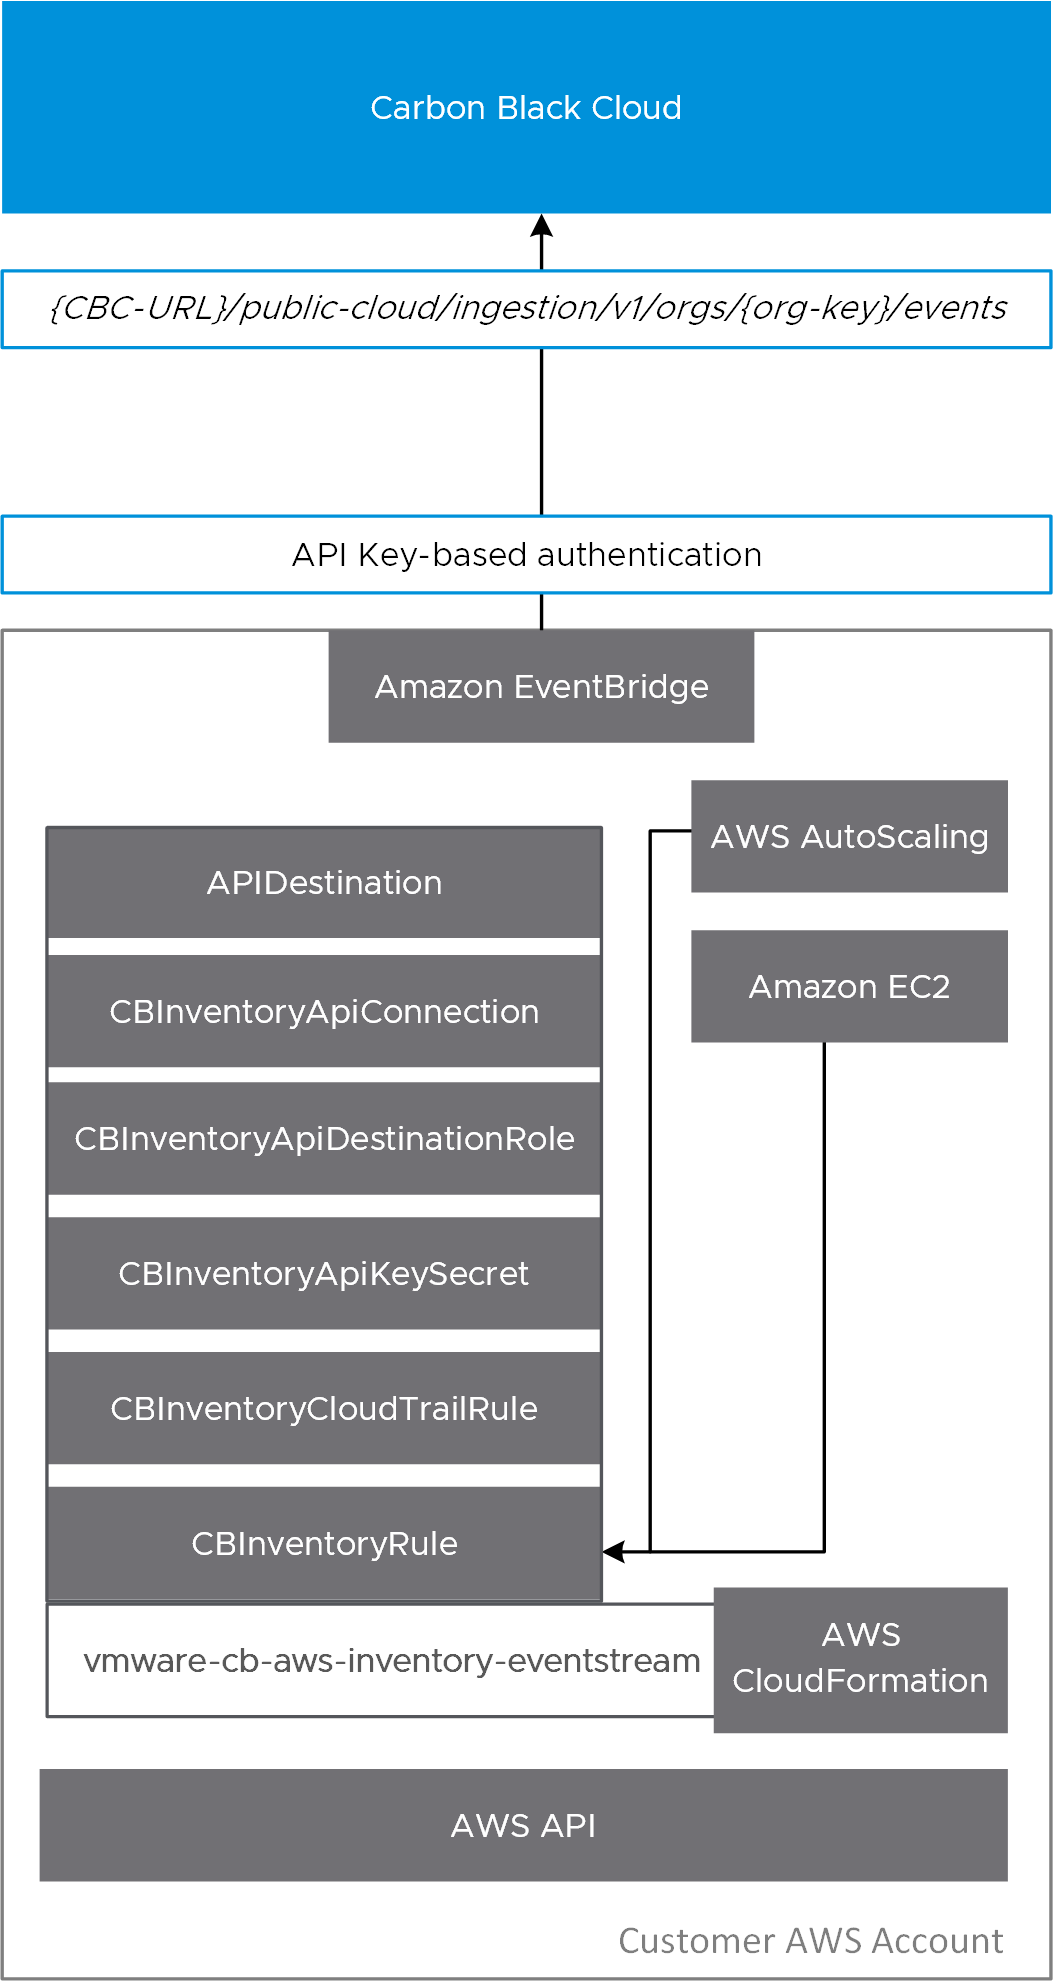 Diagram showing CloudFormation components supporting EventBridge resources for streaming inventory updates in Carbon Black Cloud .